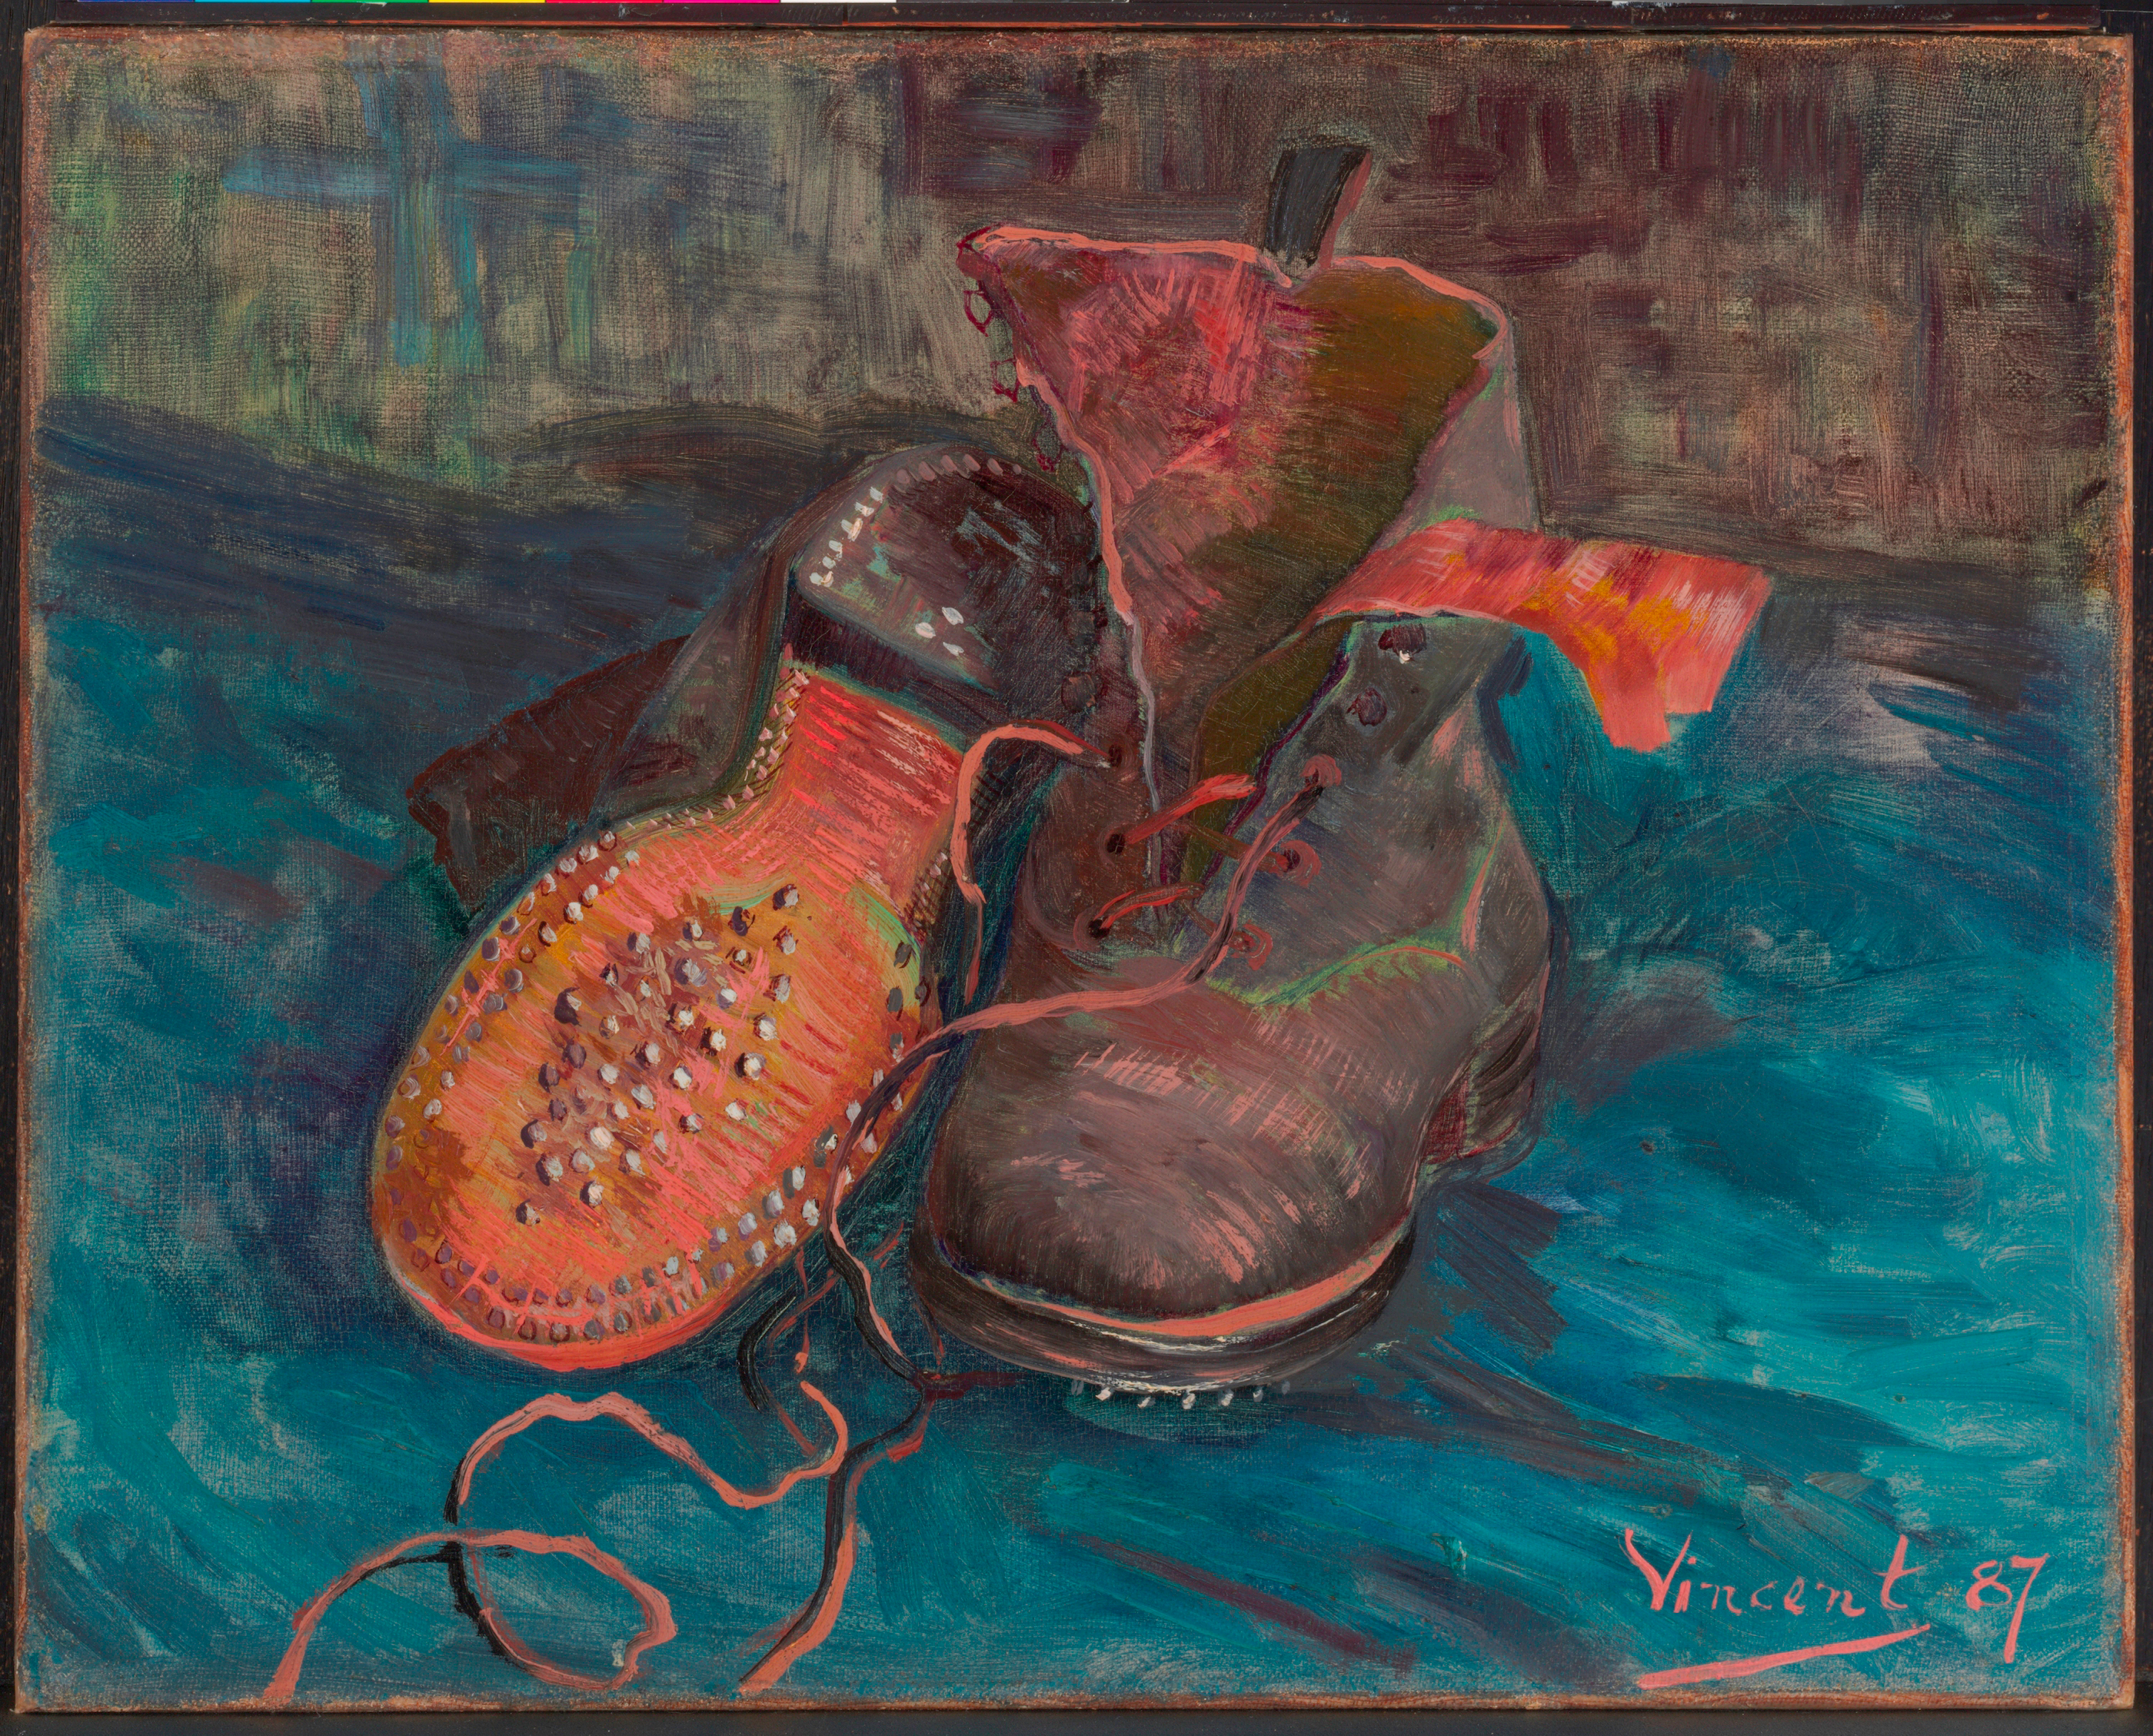 A Pair of Boots by Vincent van Gogh - 1887 - 32.7 x 41.3 cm Baltimore Museum of Art